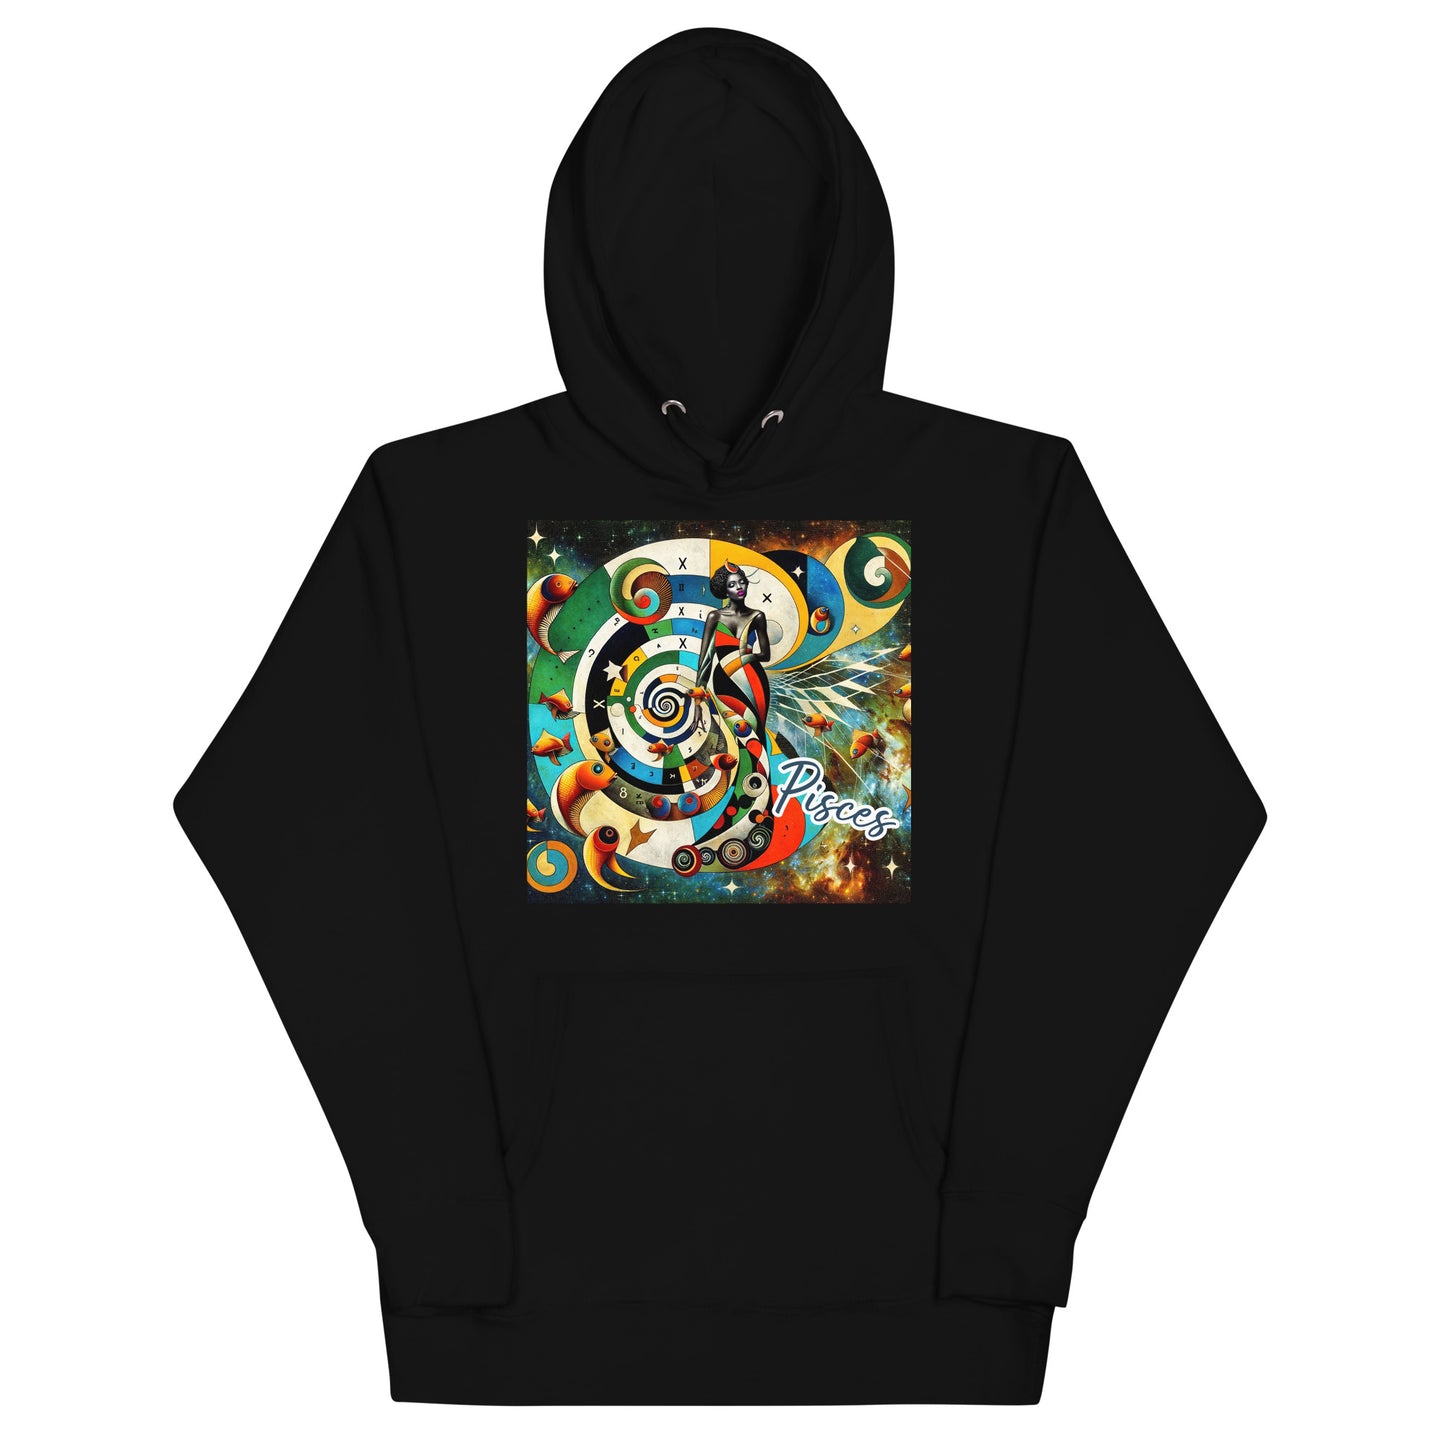 Boundless Pisces - Unisex Hoodie